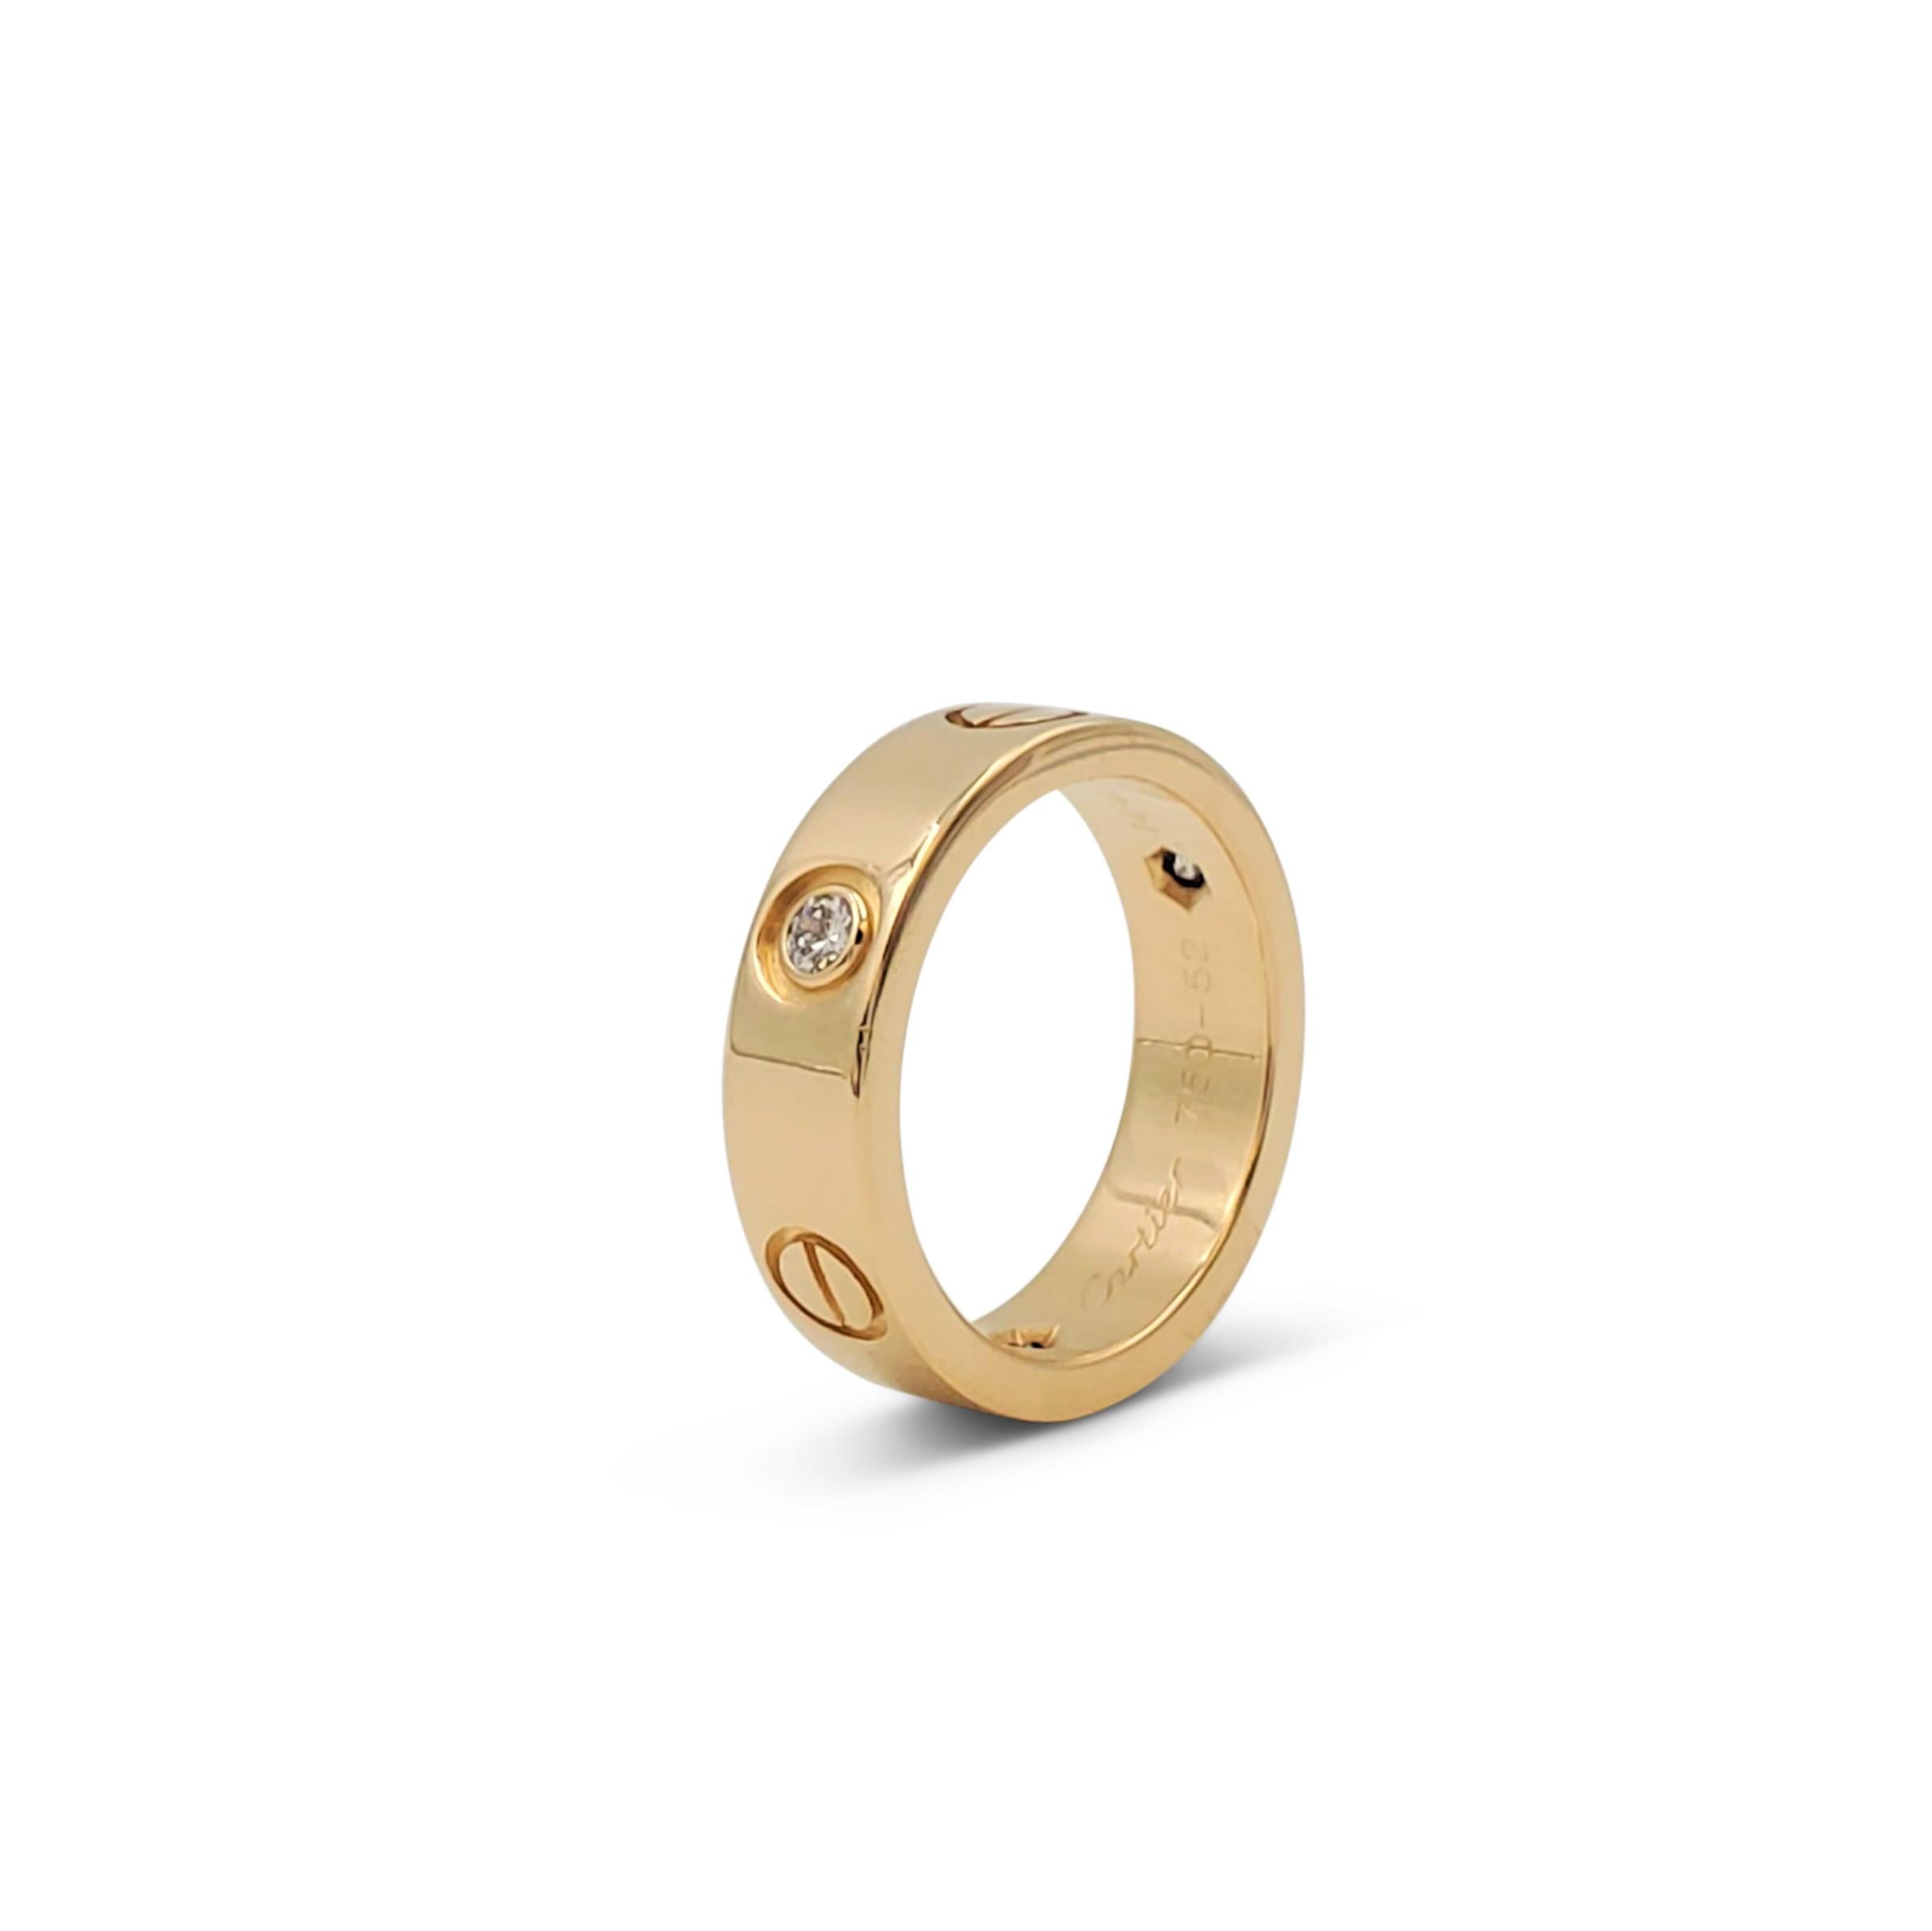 Authentic Cartier 'Love' ring crafted in 18 karat yellow gold and set with three round brilliant cut diamonds. Signed Cartier, 750, 52, 1998, with serial number and hallmarks. Ring size 52 (US 6). The ring is not presented with the original box or